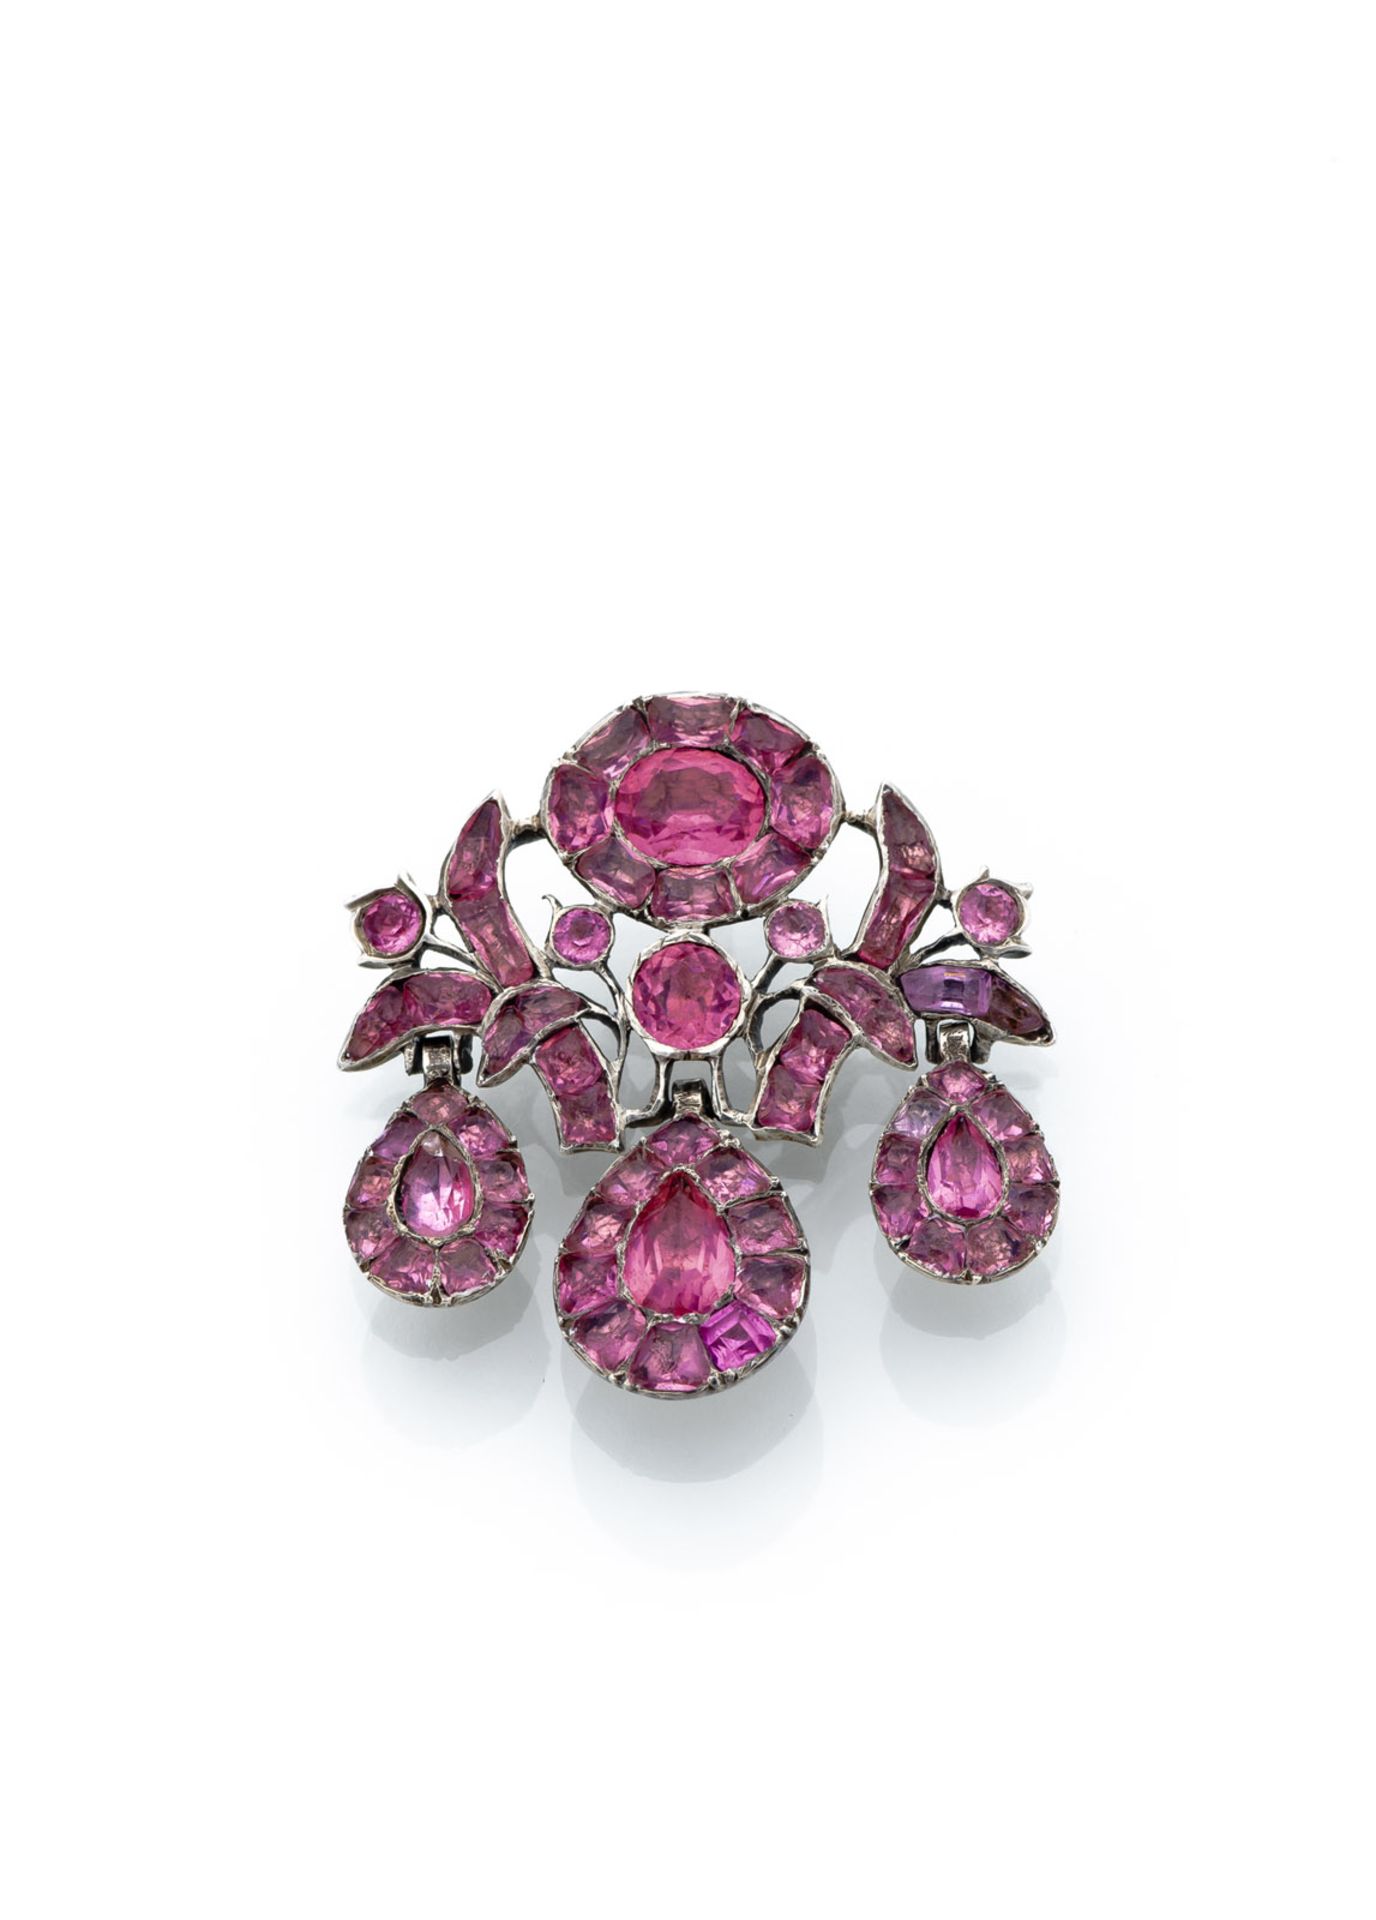 PENDANT WITH PINK TOPAZES